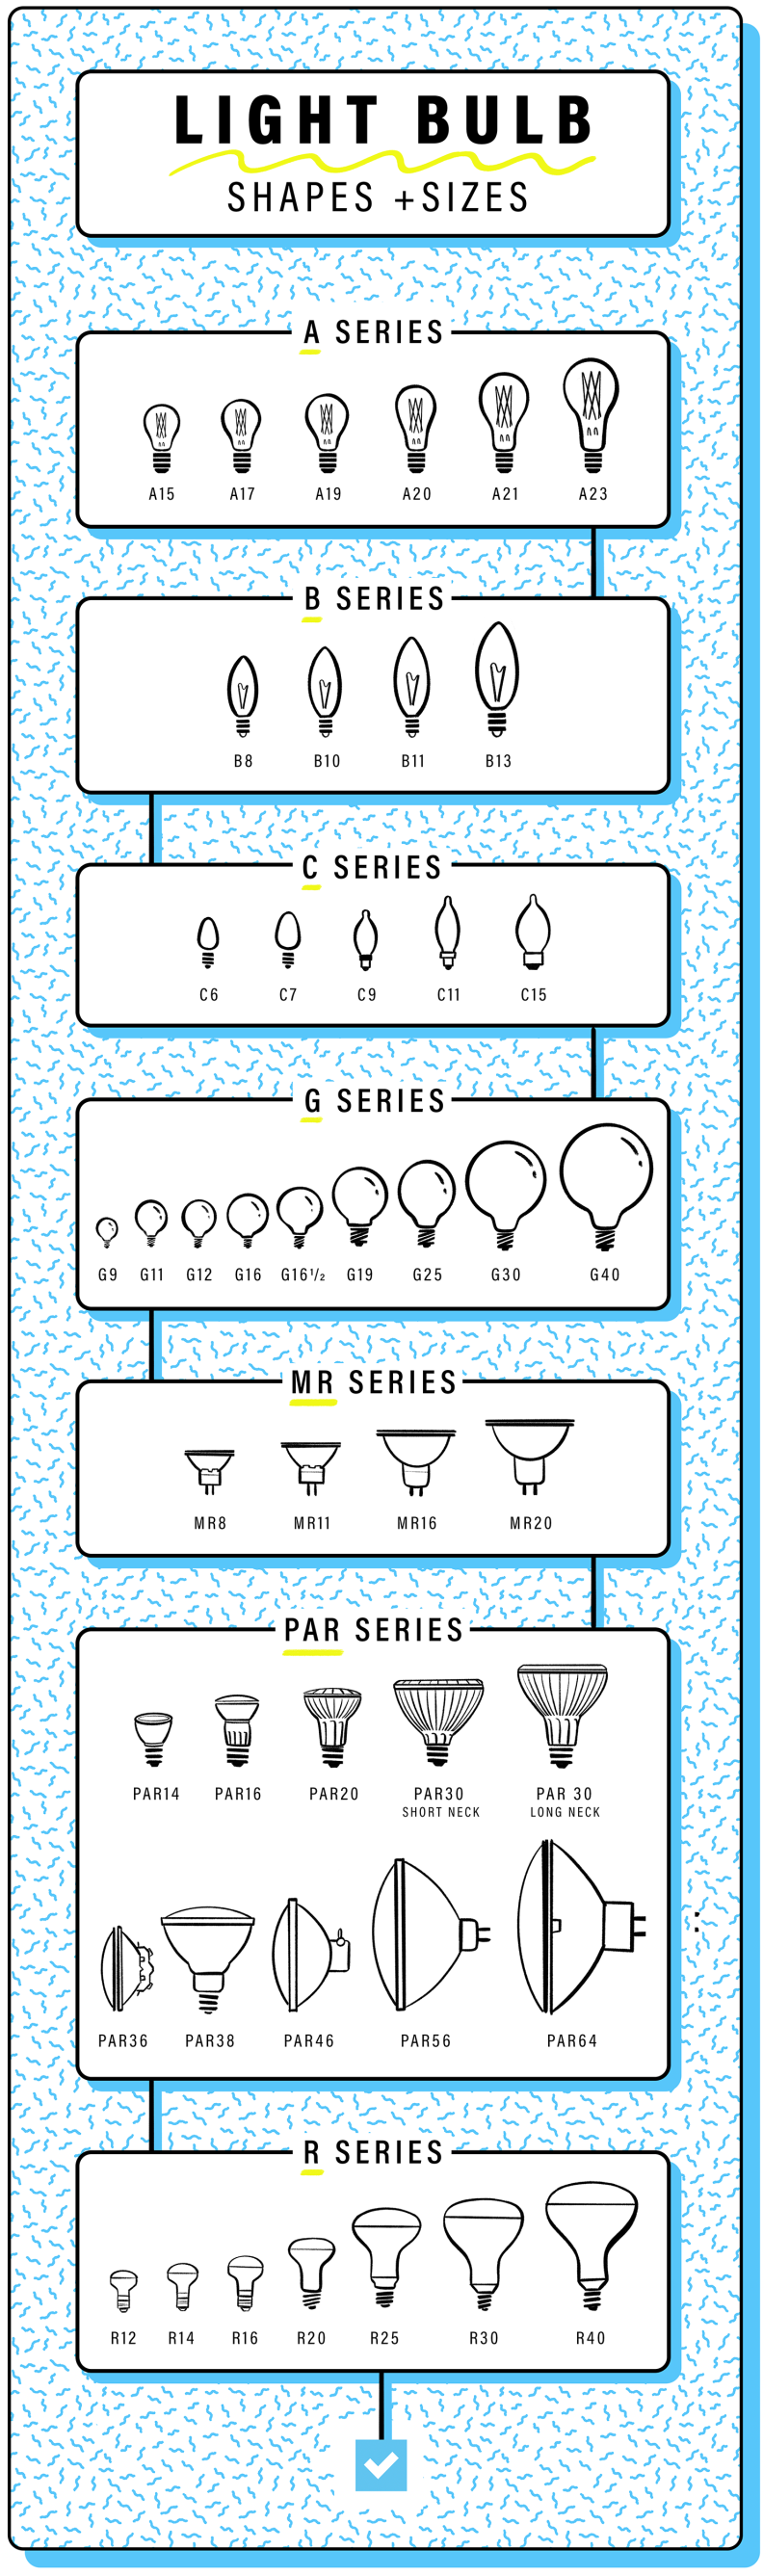 A graphic illustration shows all different shapes and sizes of lightbulb series